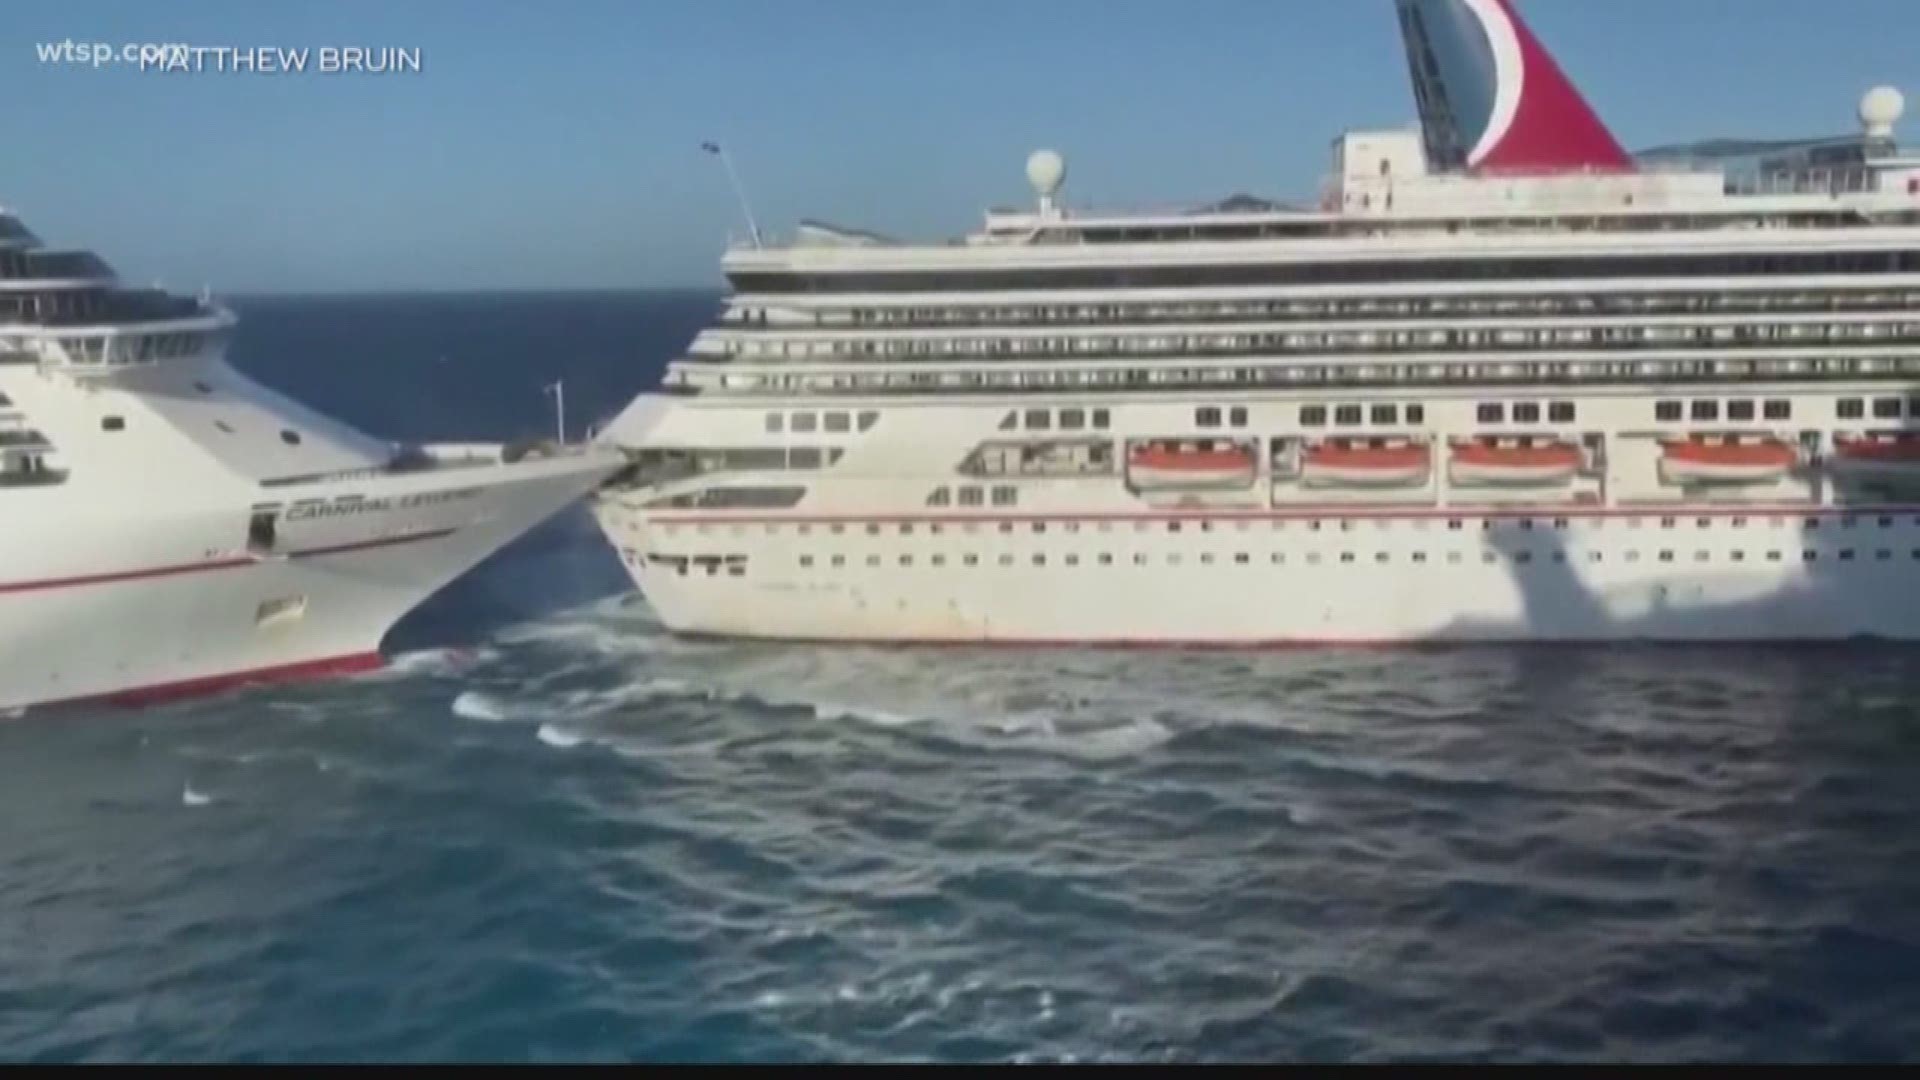 The Carnival Legend cruise ship hit by another ship Friday in Mexico has returned to Port Tampa Bay.